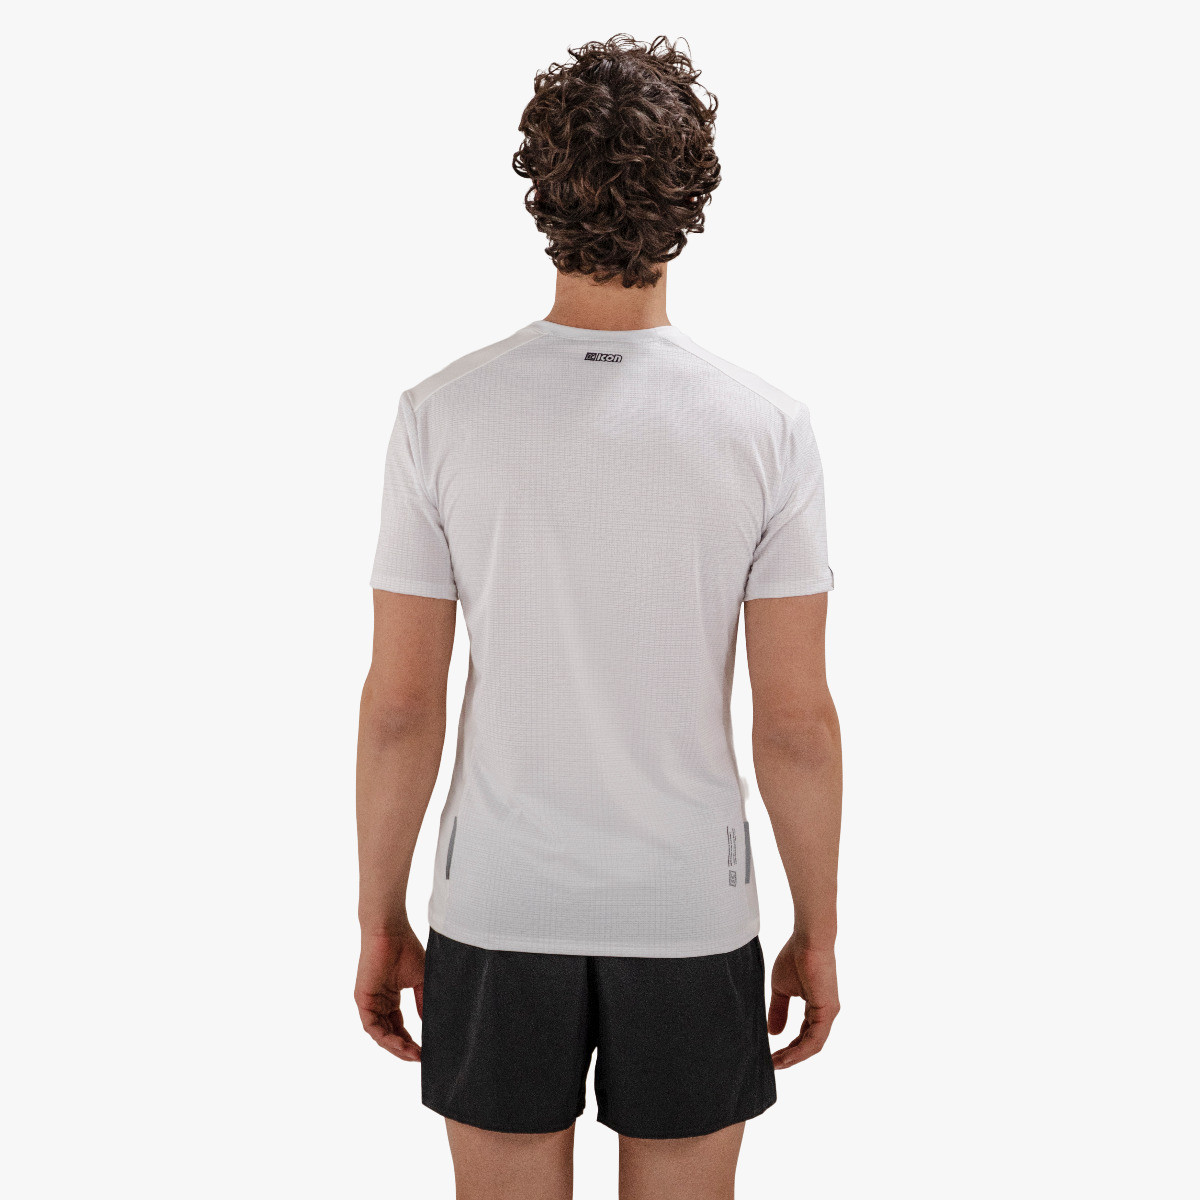 t-shirt technical x-over short sleeve white scicon rt11011